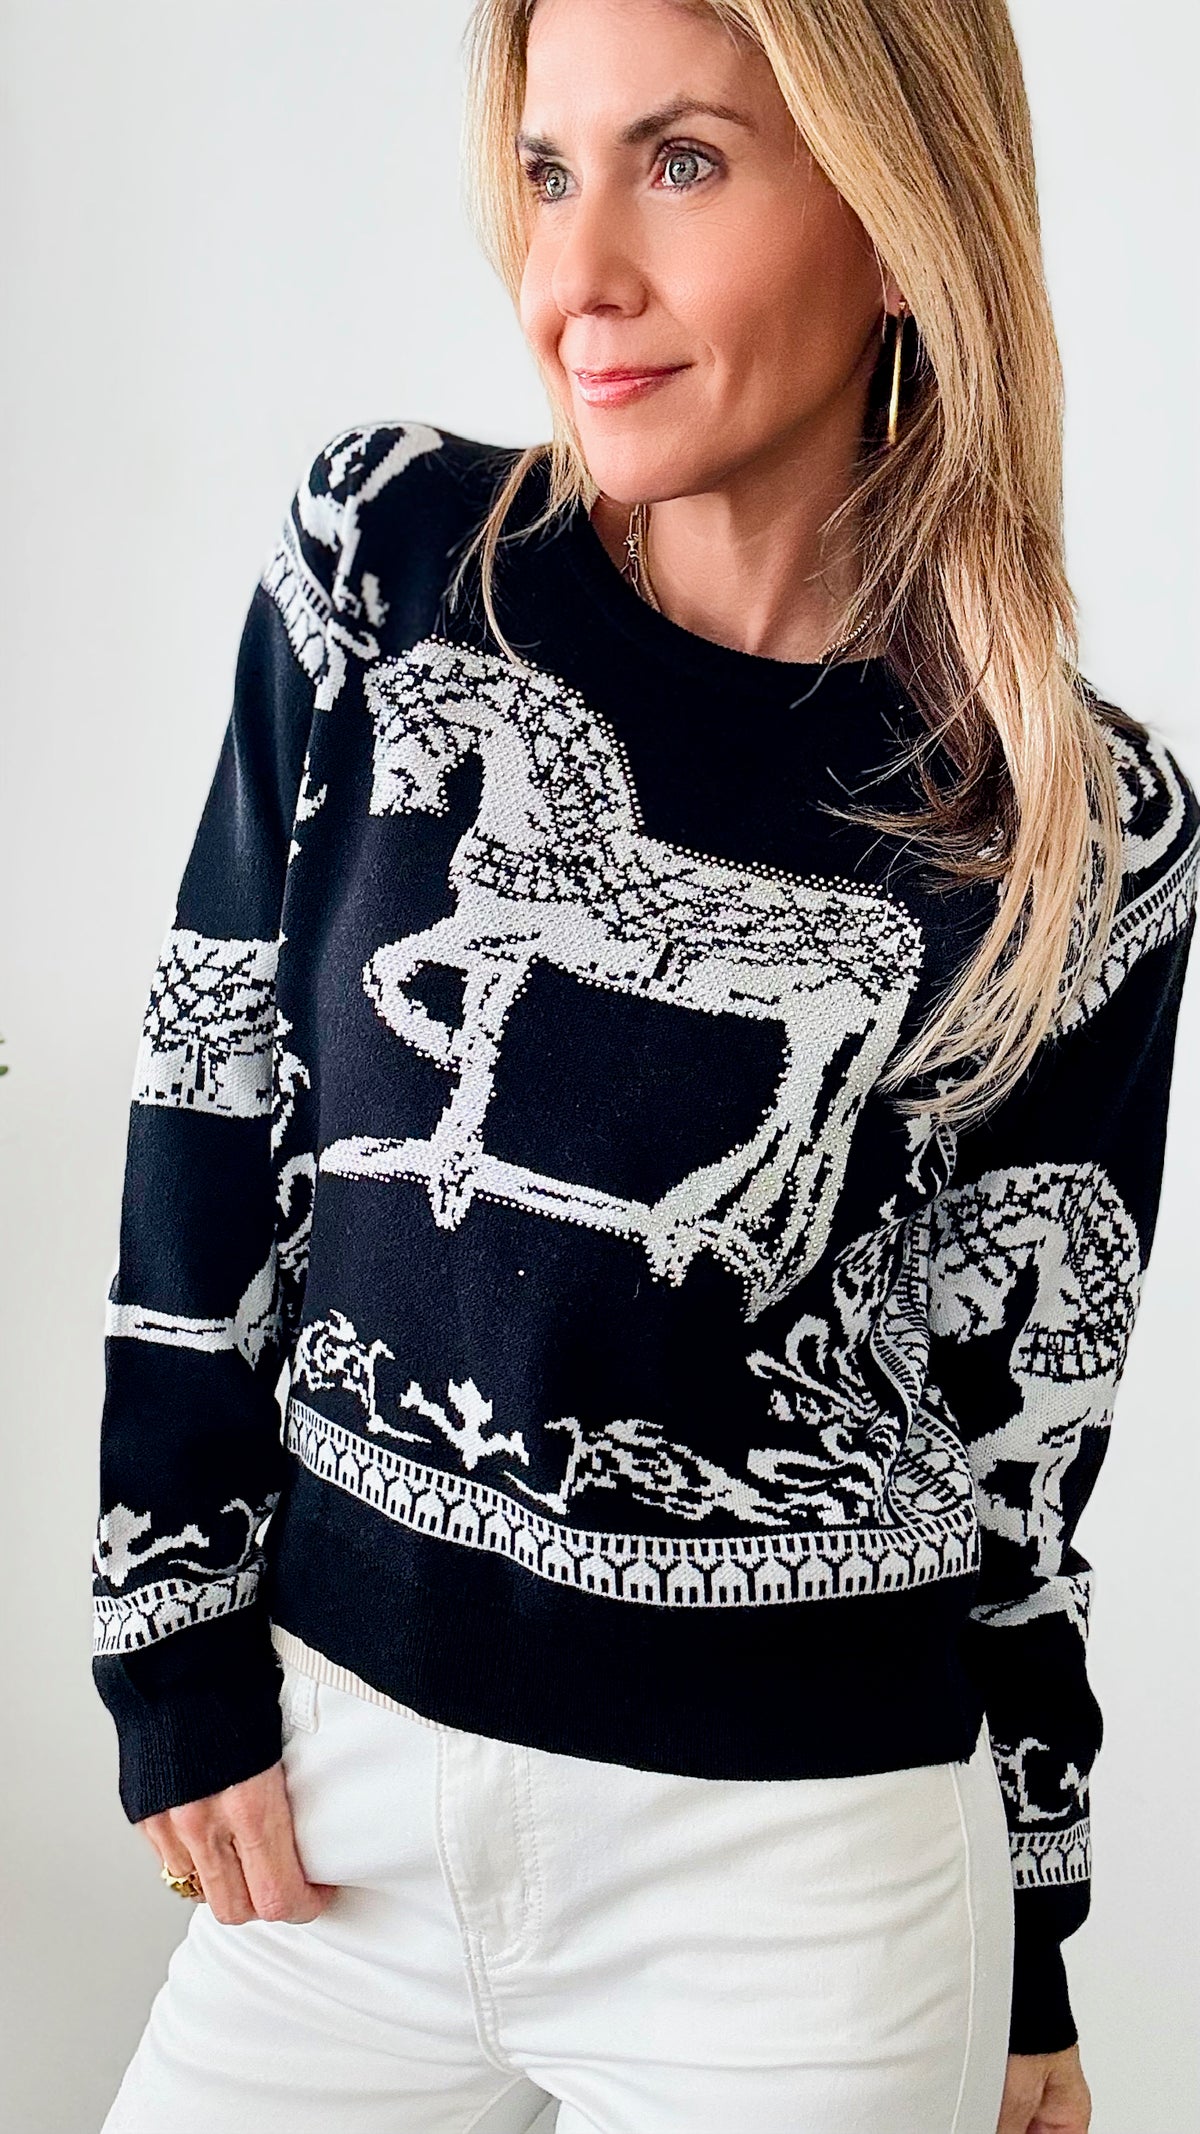 Rich in Black Equestrian Iridescent Horsebit Sweater-140 Sweaters-Chasing Bandits-Coastal Bloom Boutique, find the trendiest versions of the popular styles and looks Located in Indialantic, FL